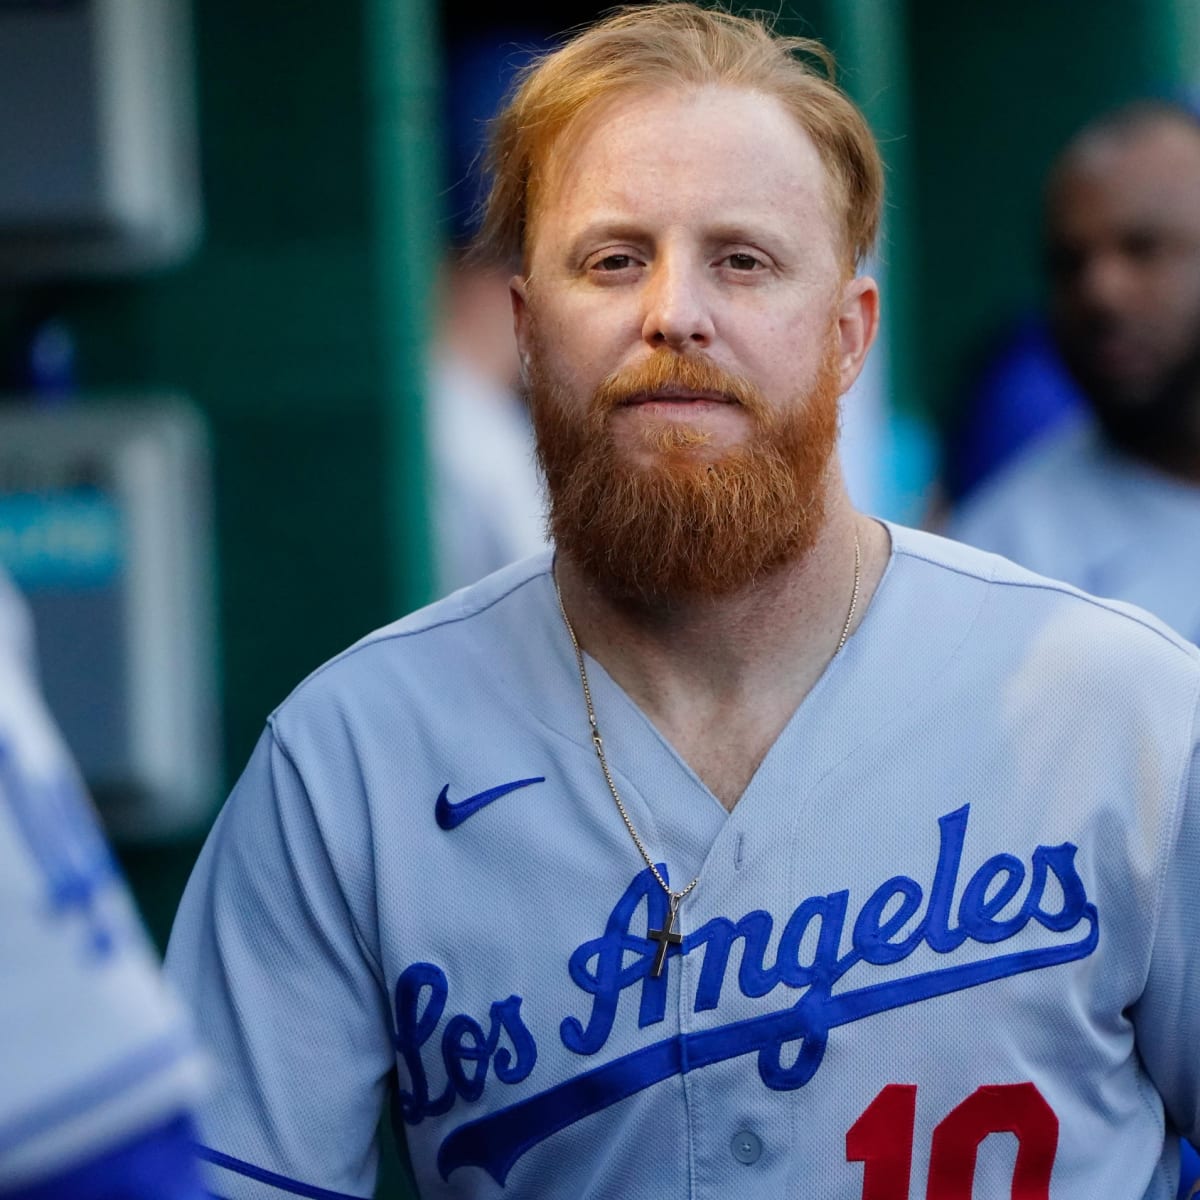 Red beard returns: Justin Turner glad to be back with Dodgers